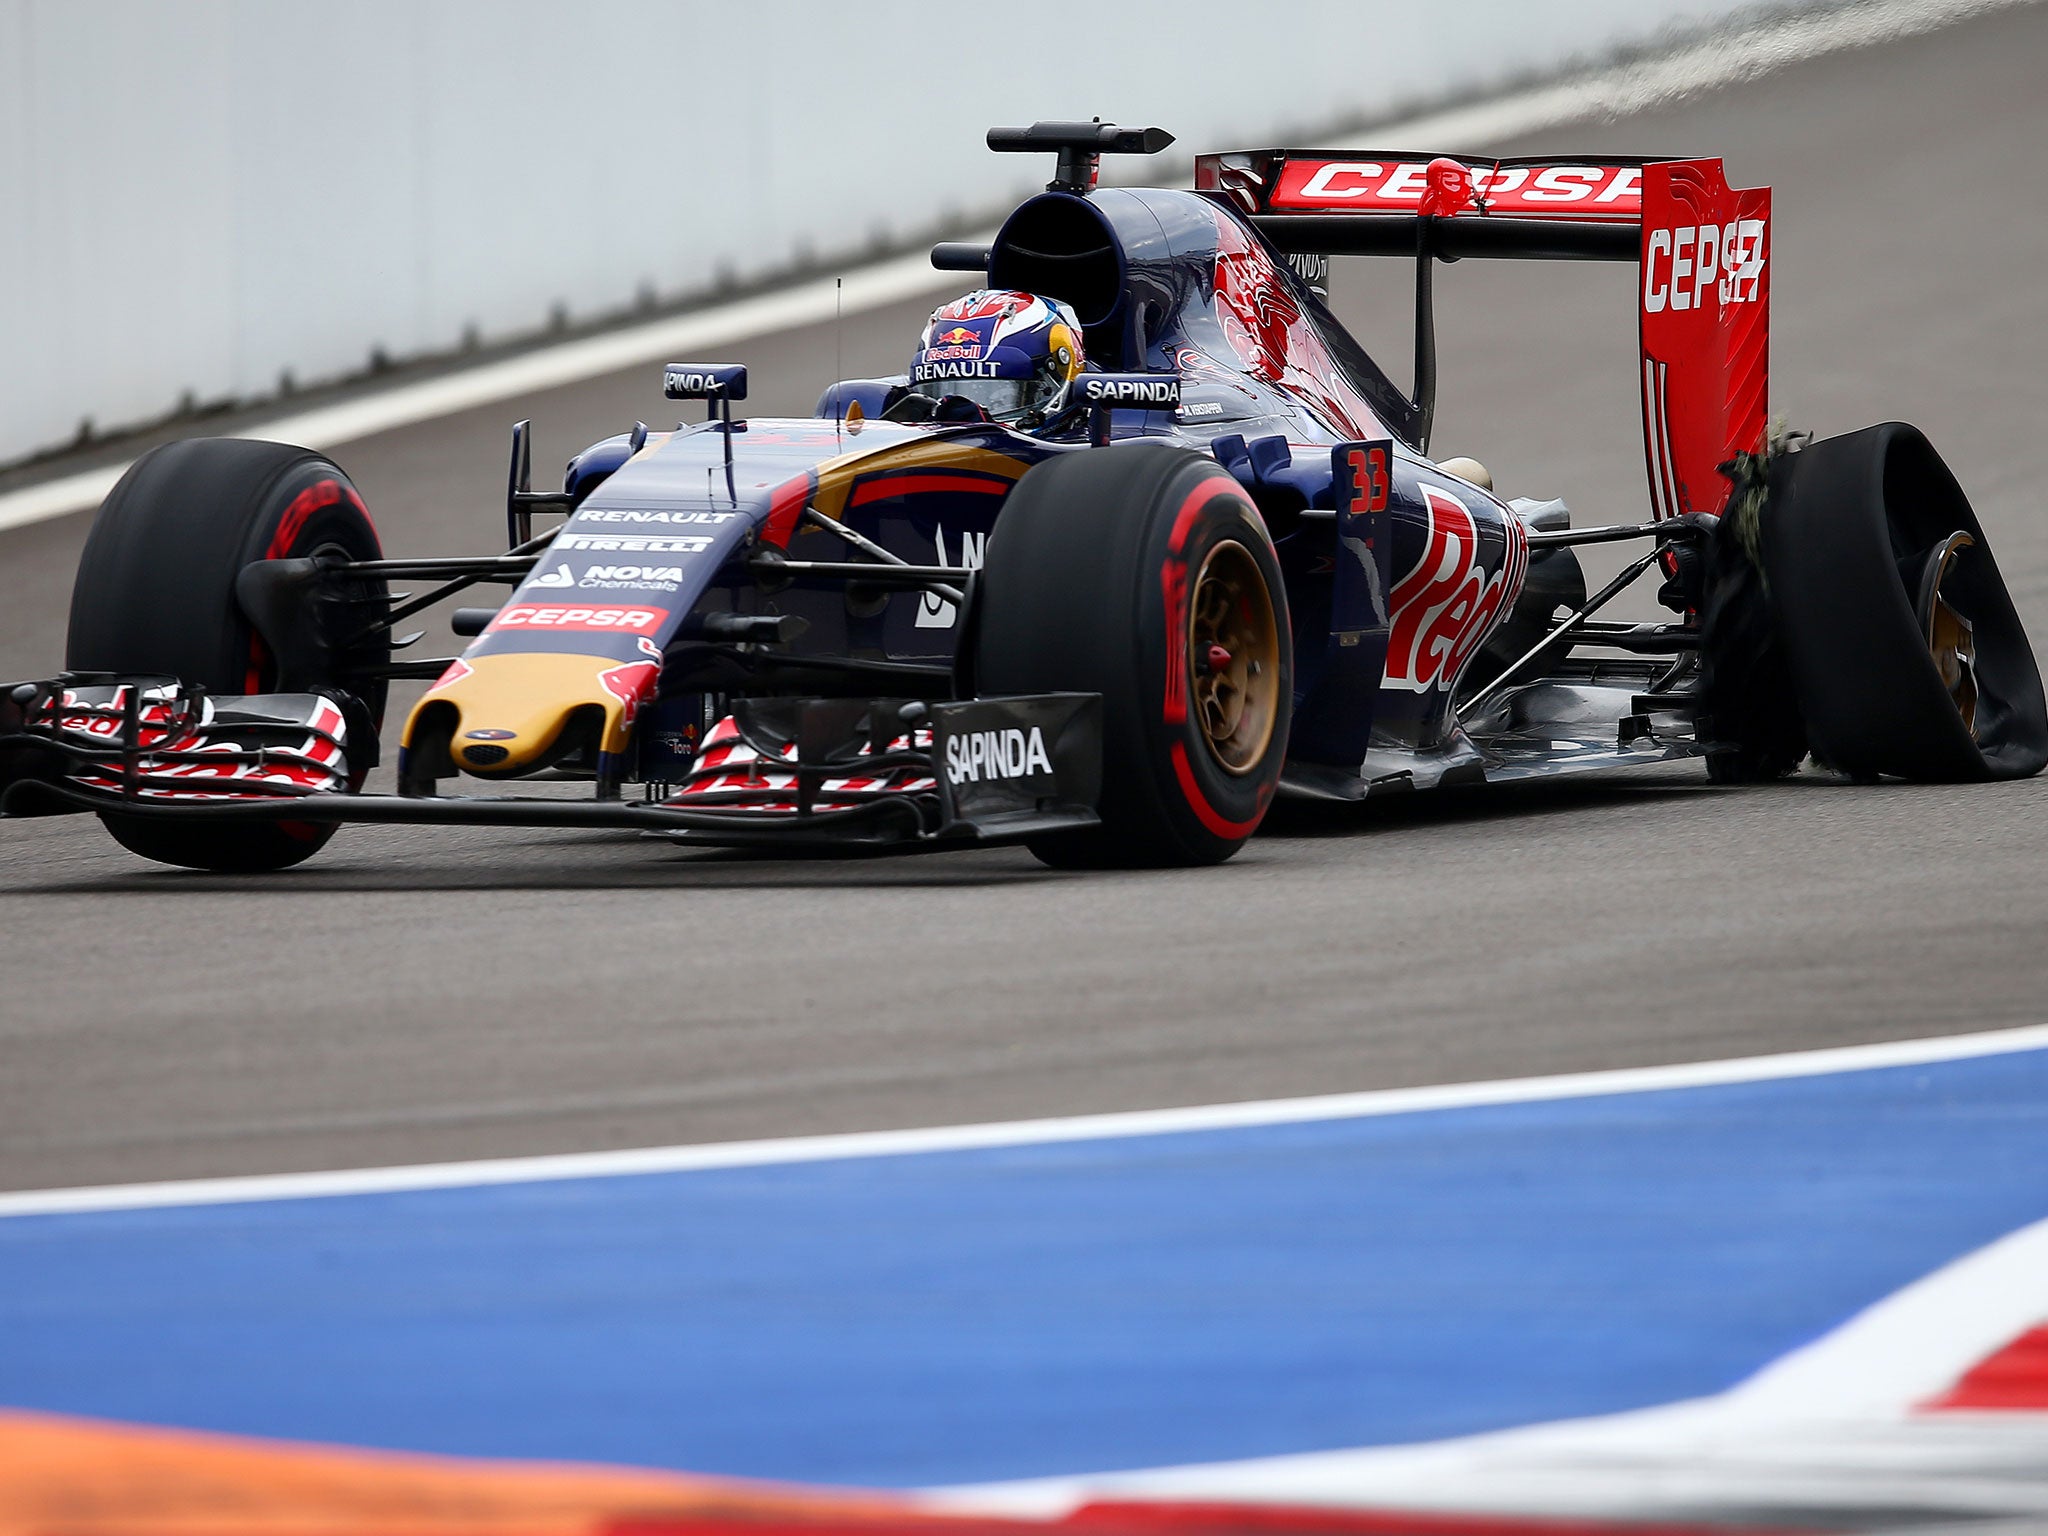 Mexico Grand Prix 2015: Max Verstappen surprises paddock by setting ...